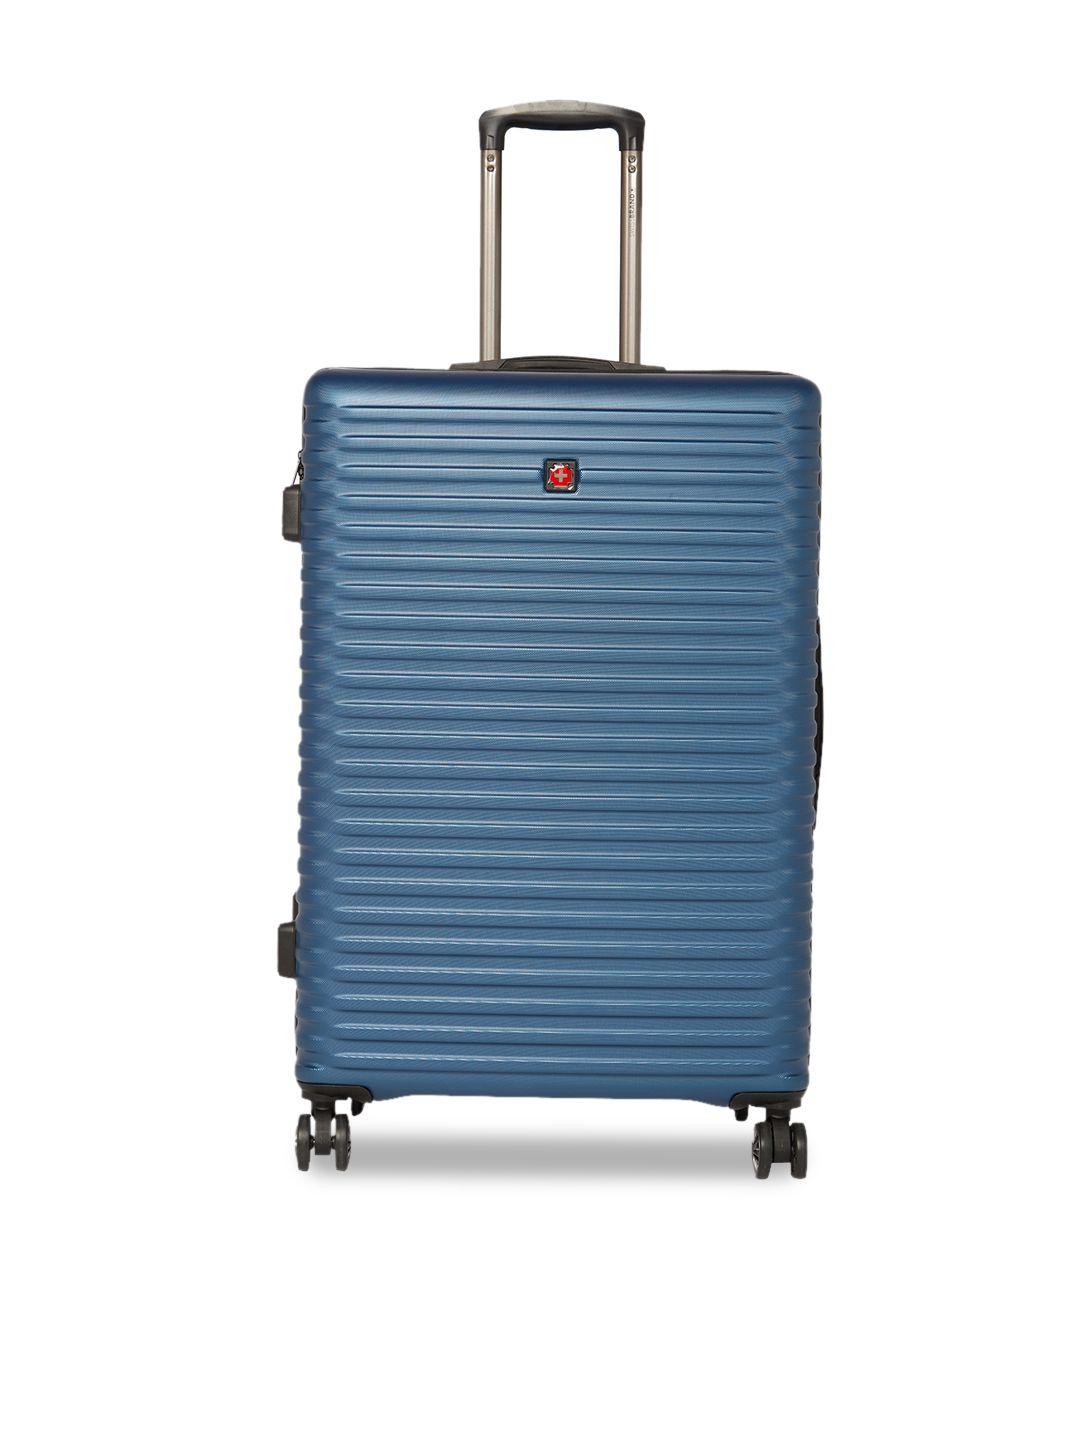 swiss-brand-navy-blue-solid-dublin-hard-sided-large-trolley-suitcase